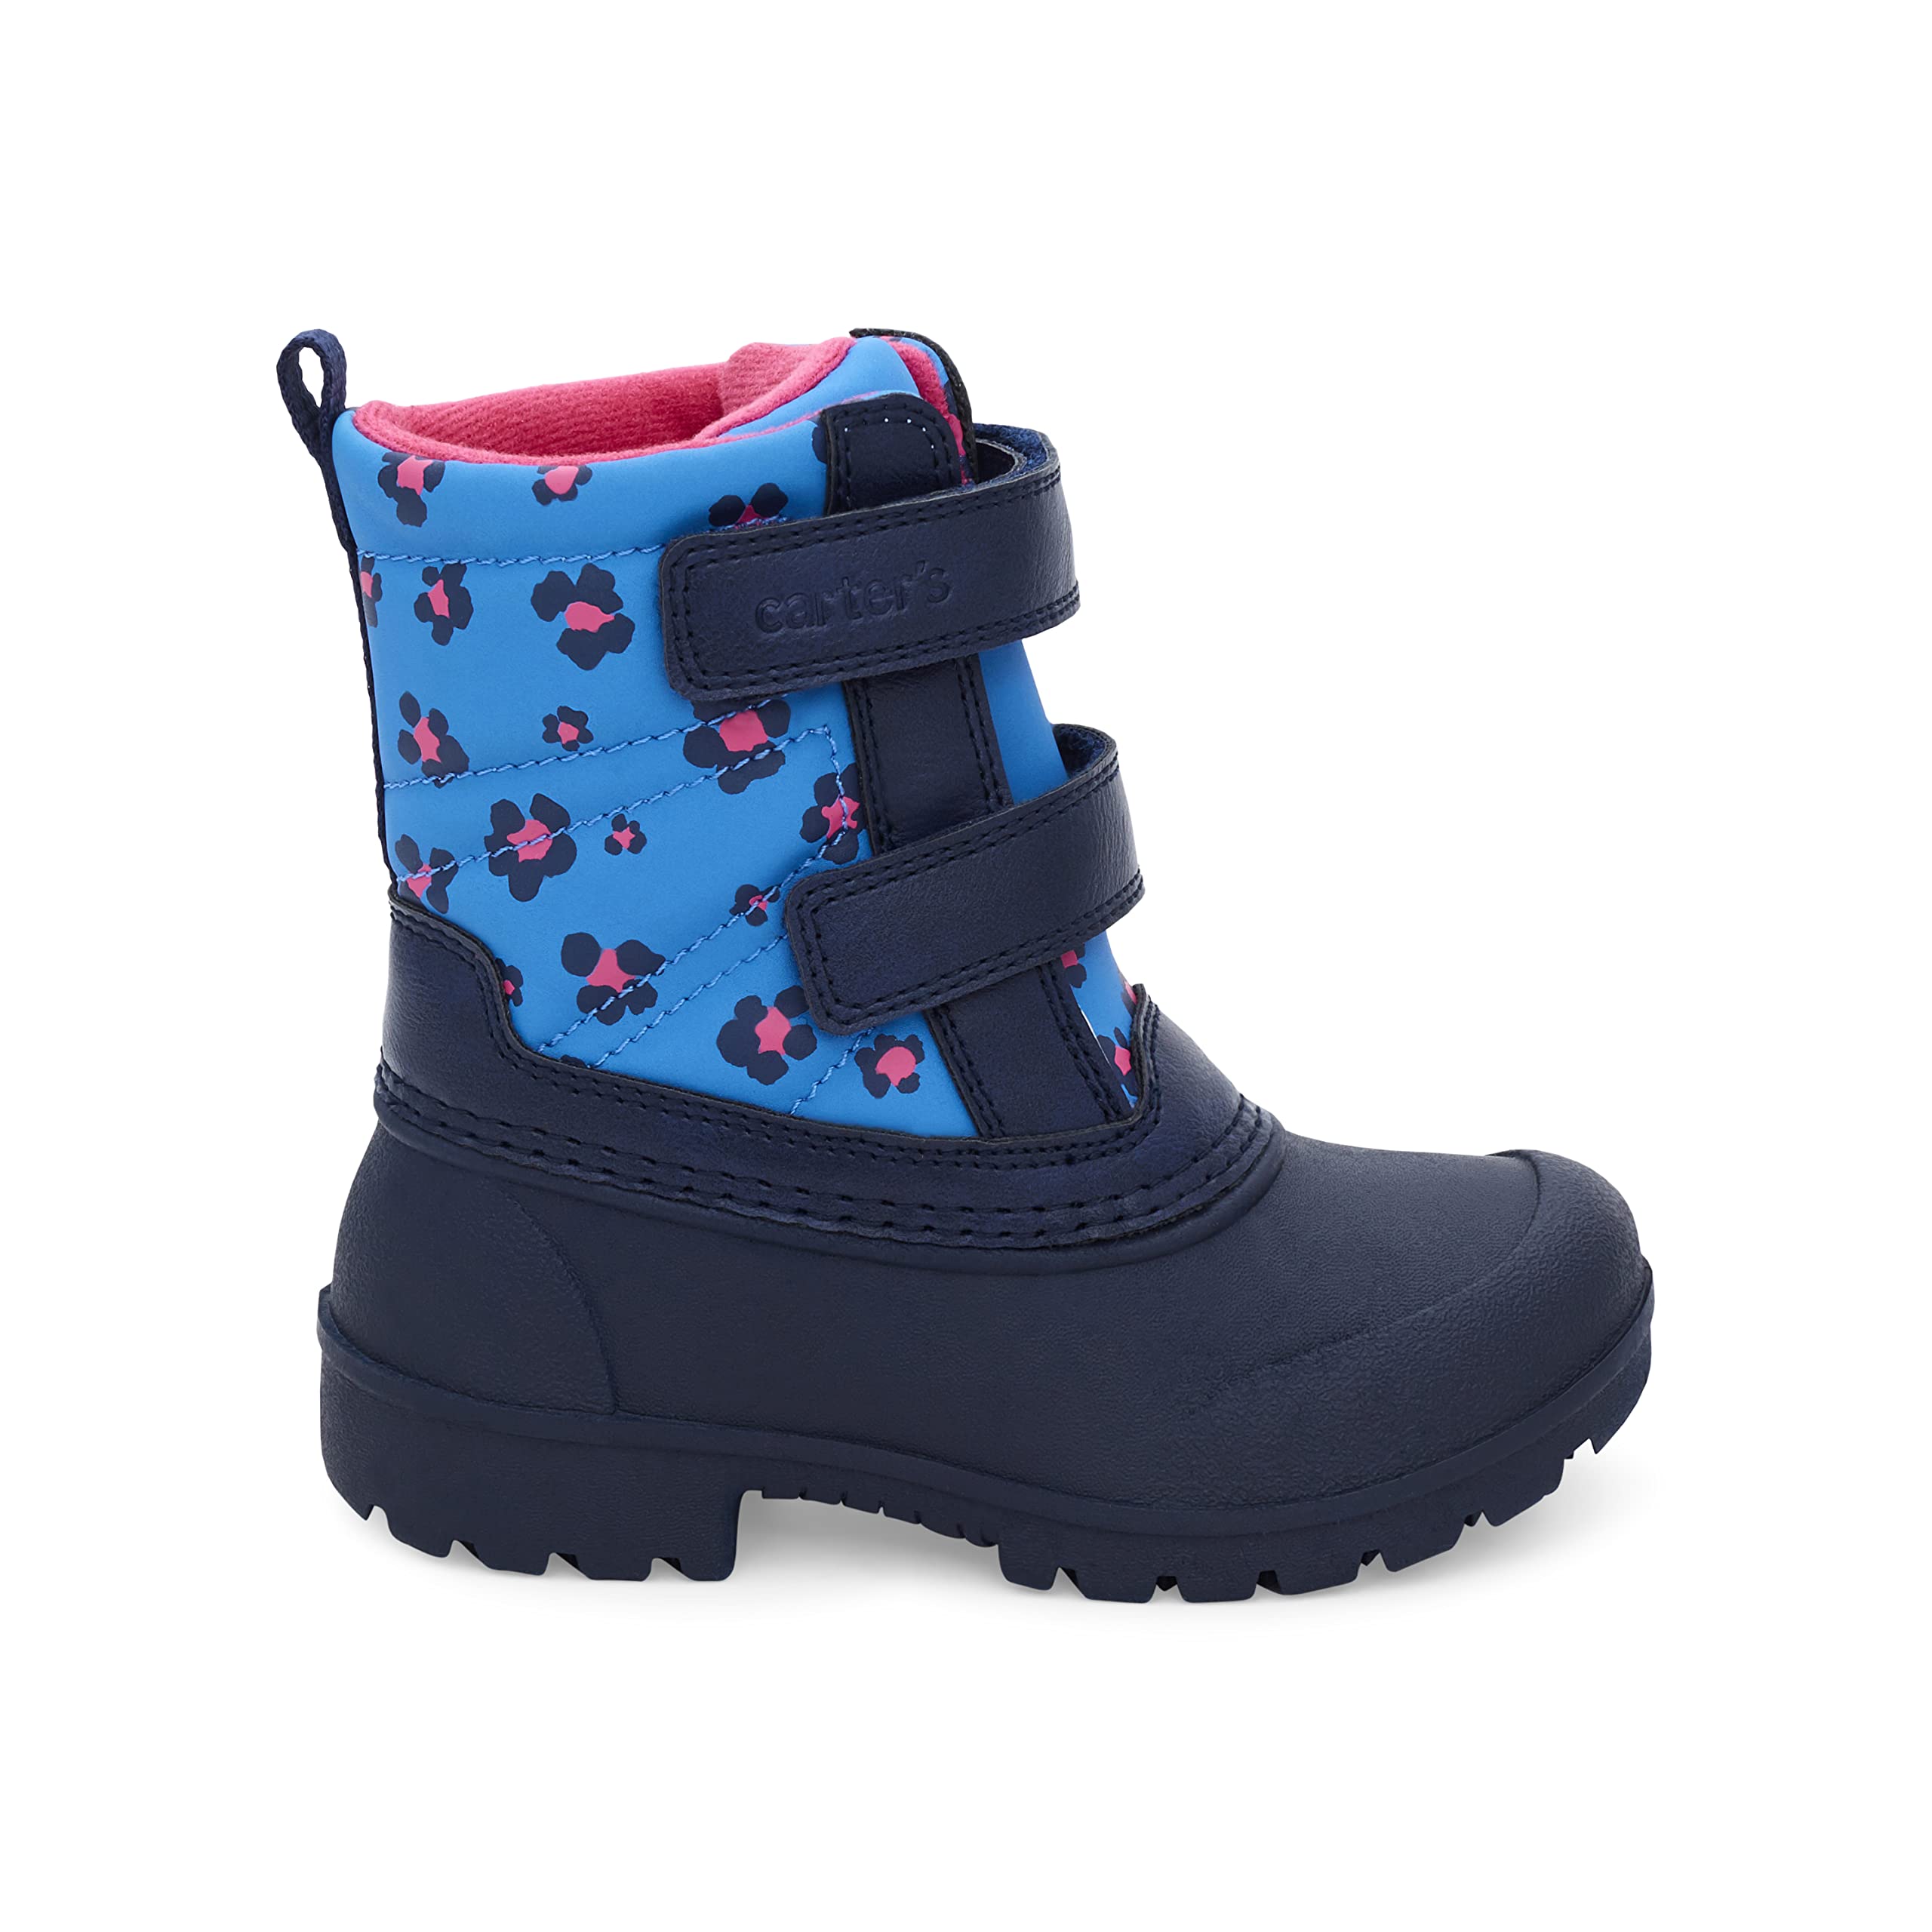 Carter's Girl's Deltha Cold Weather Boot